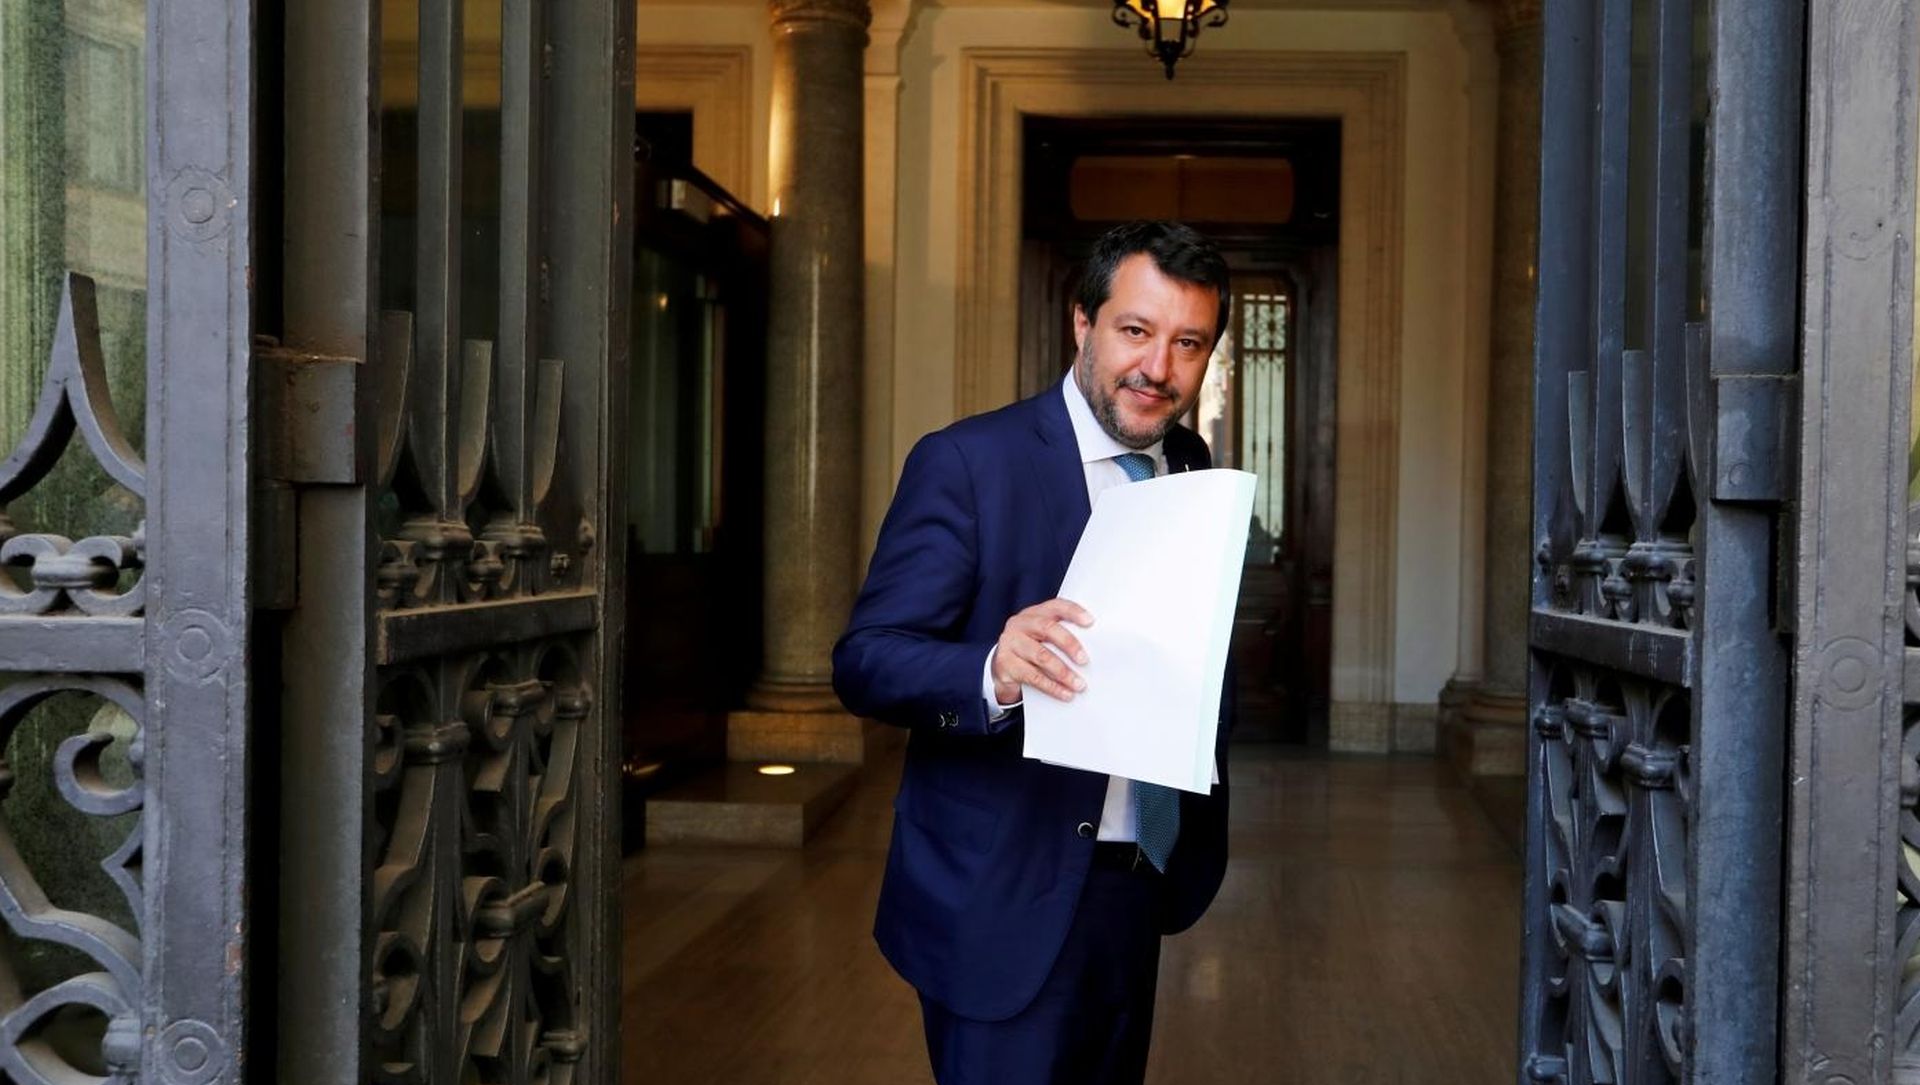 Leader of Italy's far-right League party Matteo Salvini arrives to address the upper house of parliament, in Rome Leader of Italy's far-right League party Matteo Salvini arrives to address the upper house of parliament ahead of a vote by senators on whether to allow magistrates to investigate him for refusing a migrant rescue boat permission to land last year when he was interior minister, in Rome, Italy, July 30, 2020. REUTERS/Remo Casilli REMO CASILLI